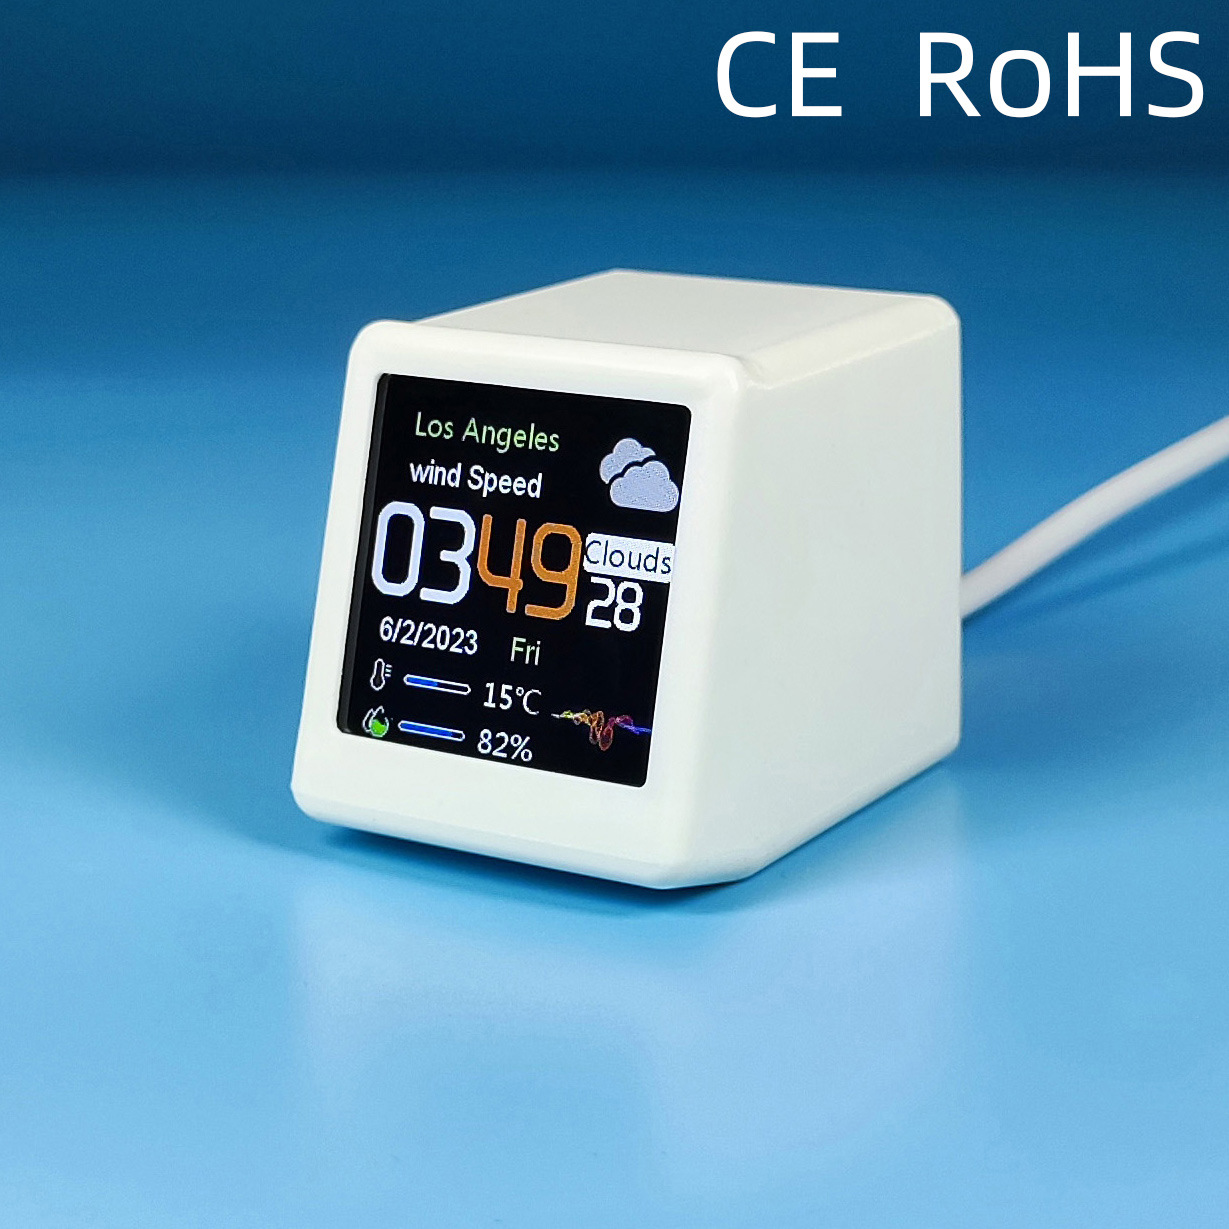 2023 new product exclusive for cross-border weather station wifi smart table clock weather small tv creative digital ornaments